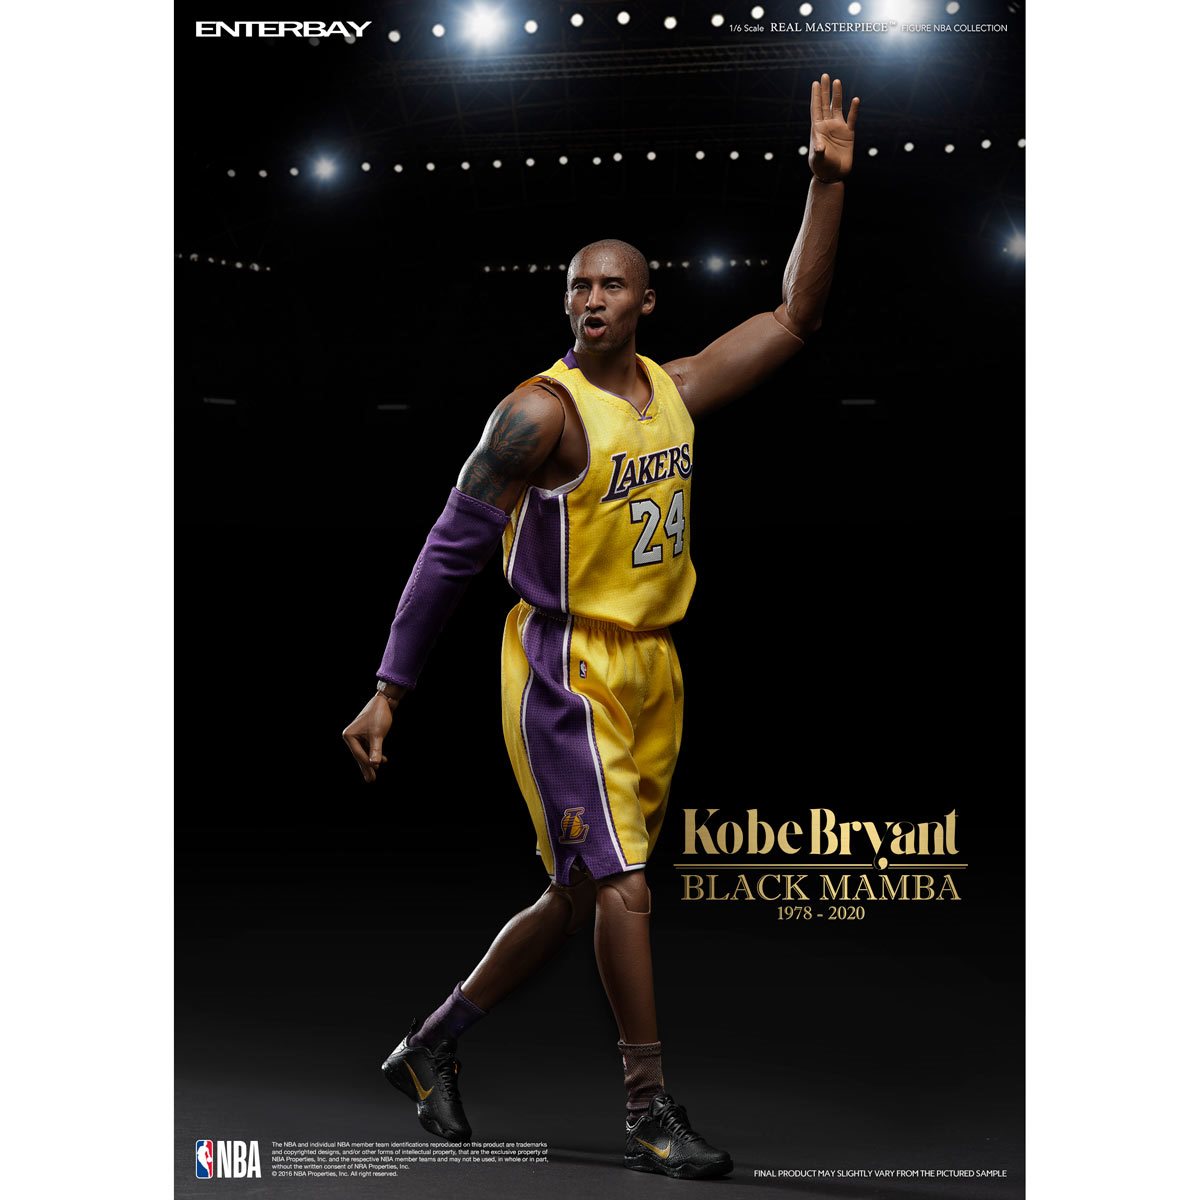 NBA Collection - Kobe Bryant Real Masterpiece Action Figure by Enterba -  Spec Fiction Shop